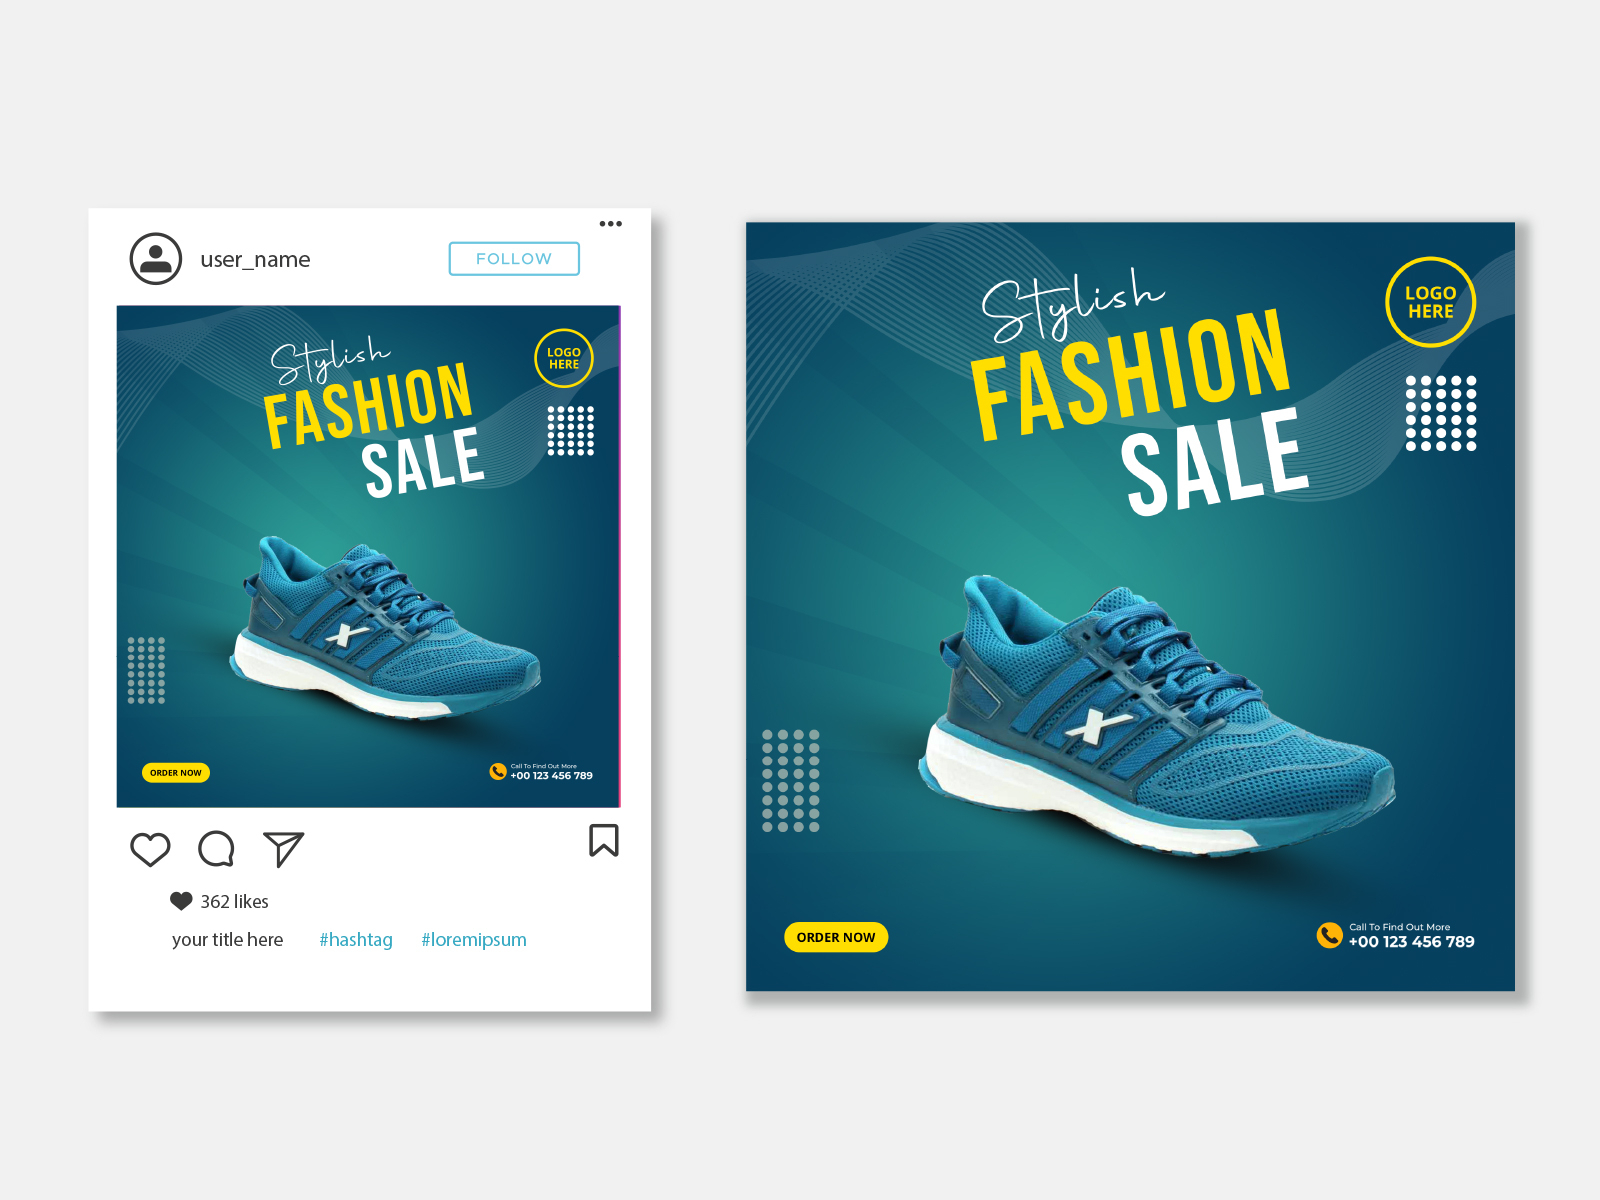 Instagram Post Design by SK Graphics on Dribbble